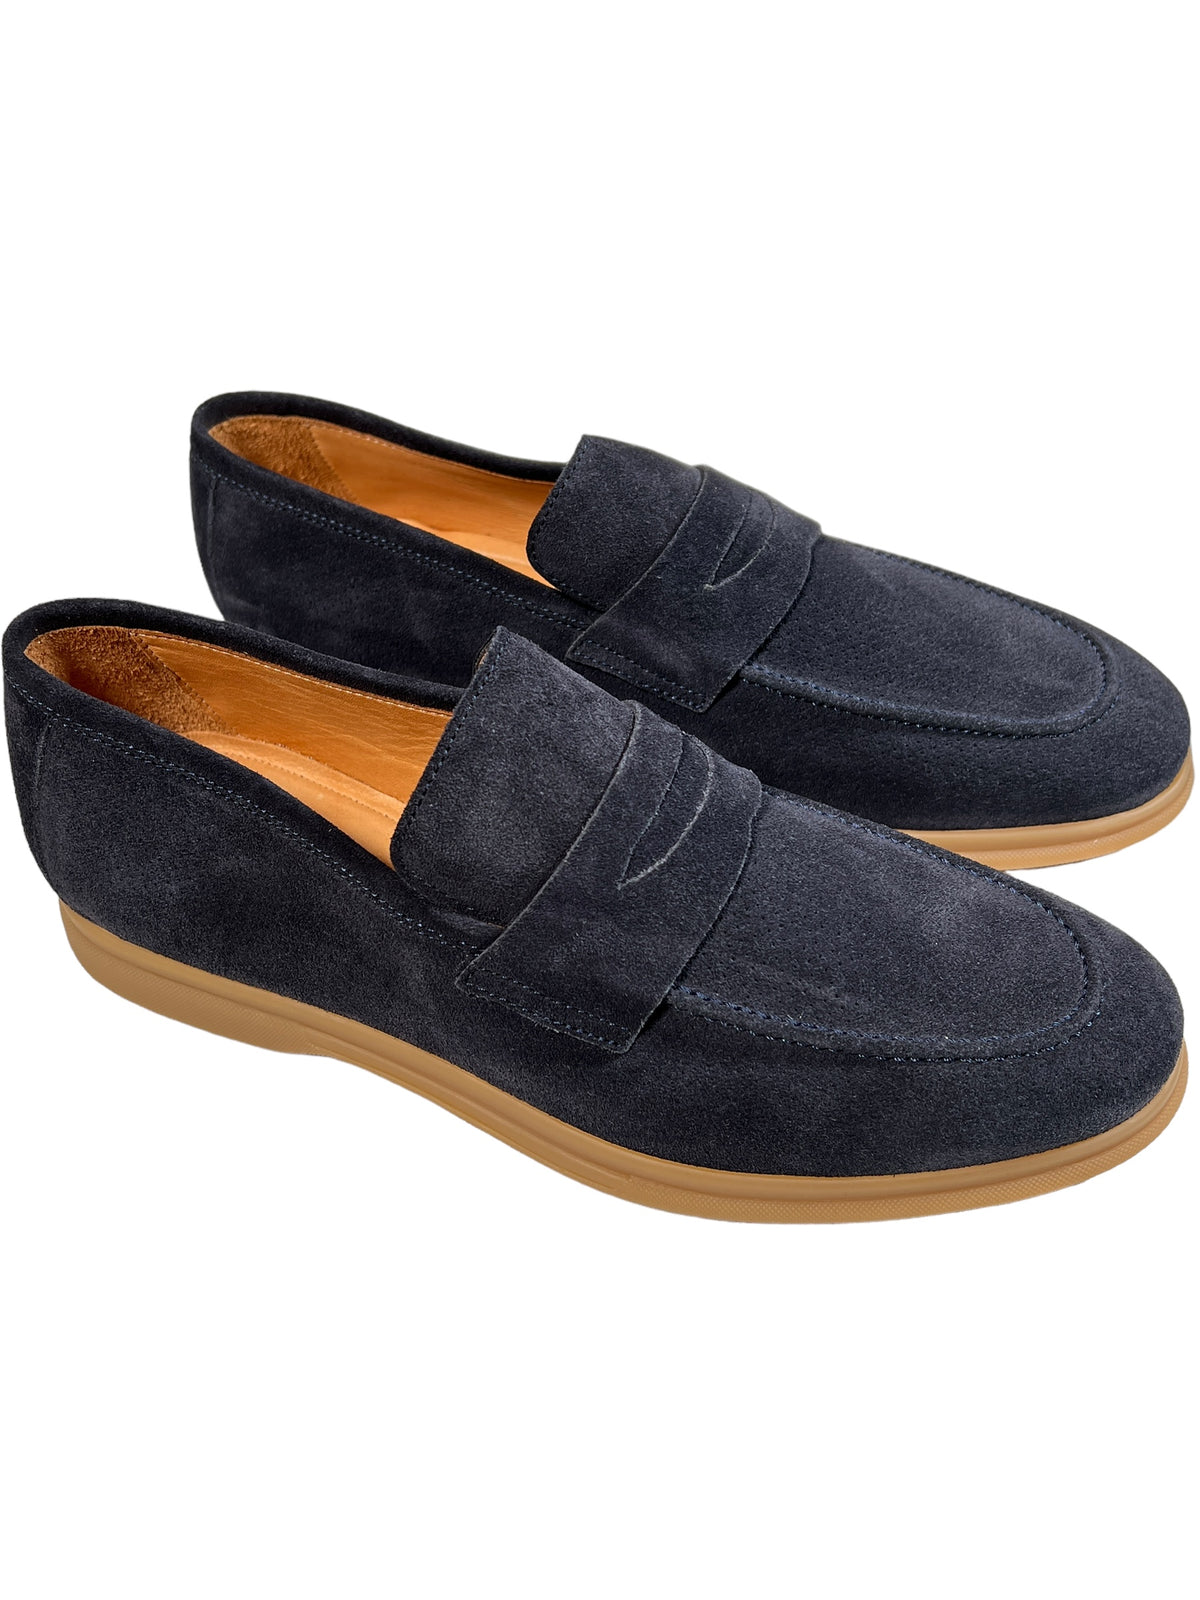 ELEVENTY PERFORATED SUEDE LOAFER - BLUE